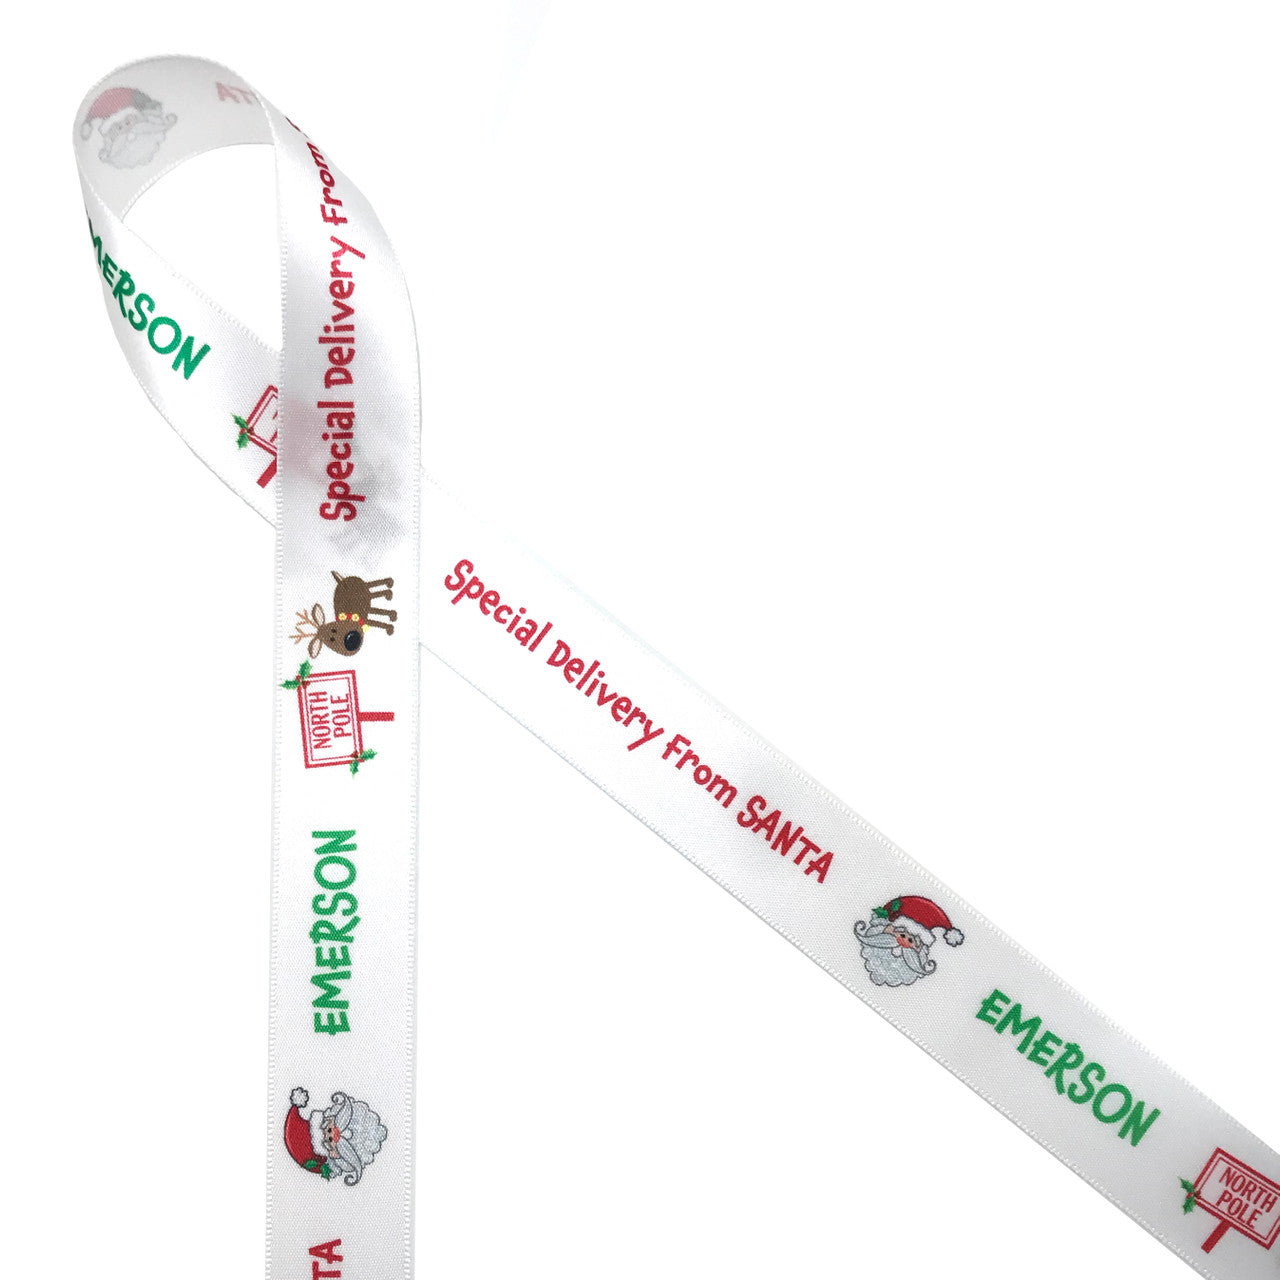 Personalized ribbon featuring any child's name with Special Delivery from Santa along with Santa's Face, a reindeer and North Pole sign printed on 7/8" white single face satin  will make Christmas morning even more magical for those who truly believe!  Make this ribbon part of any child's magical moment! All our ribbon is designed and printed in the USA